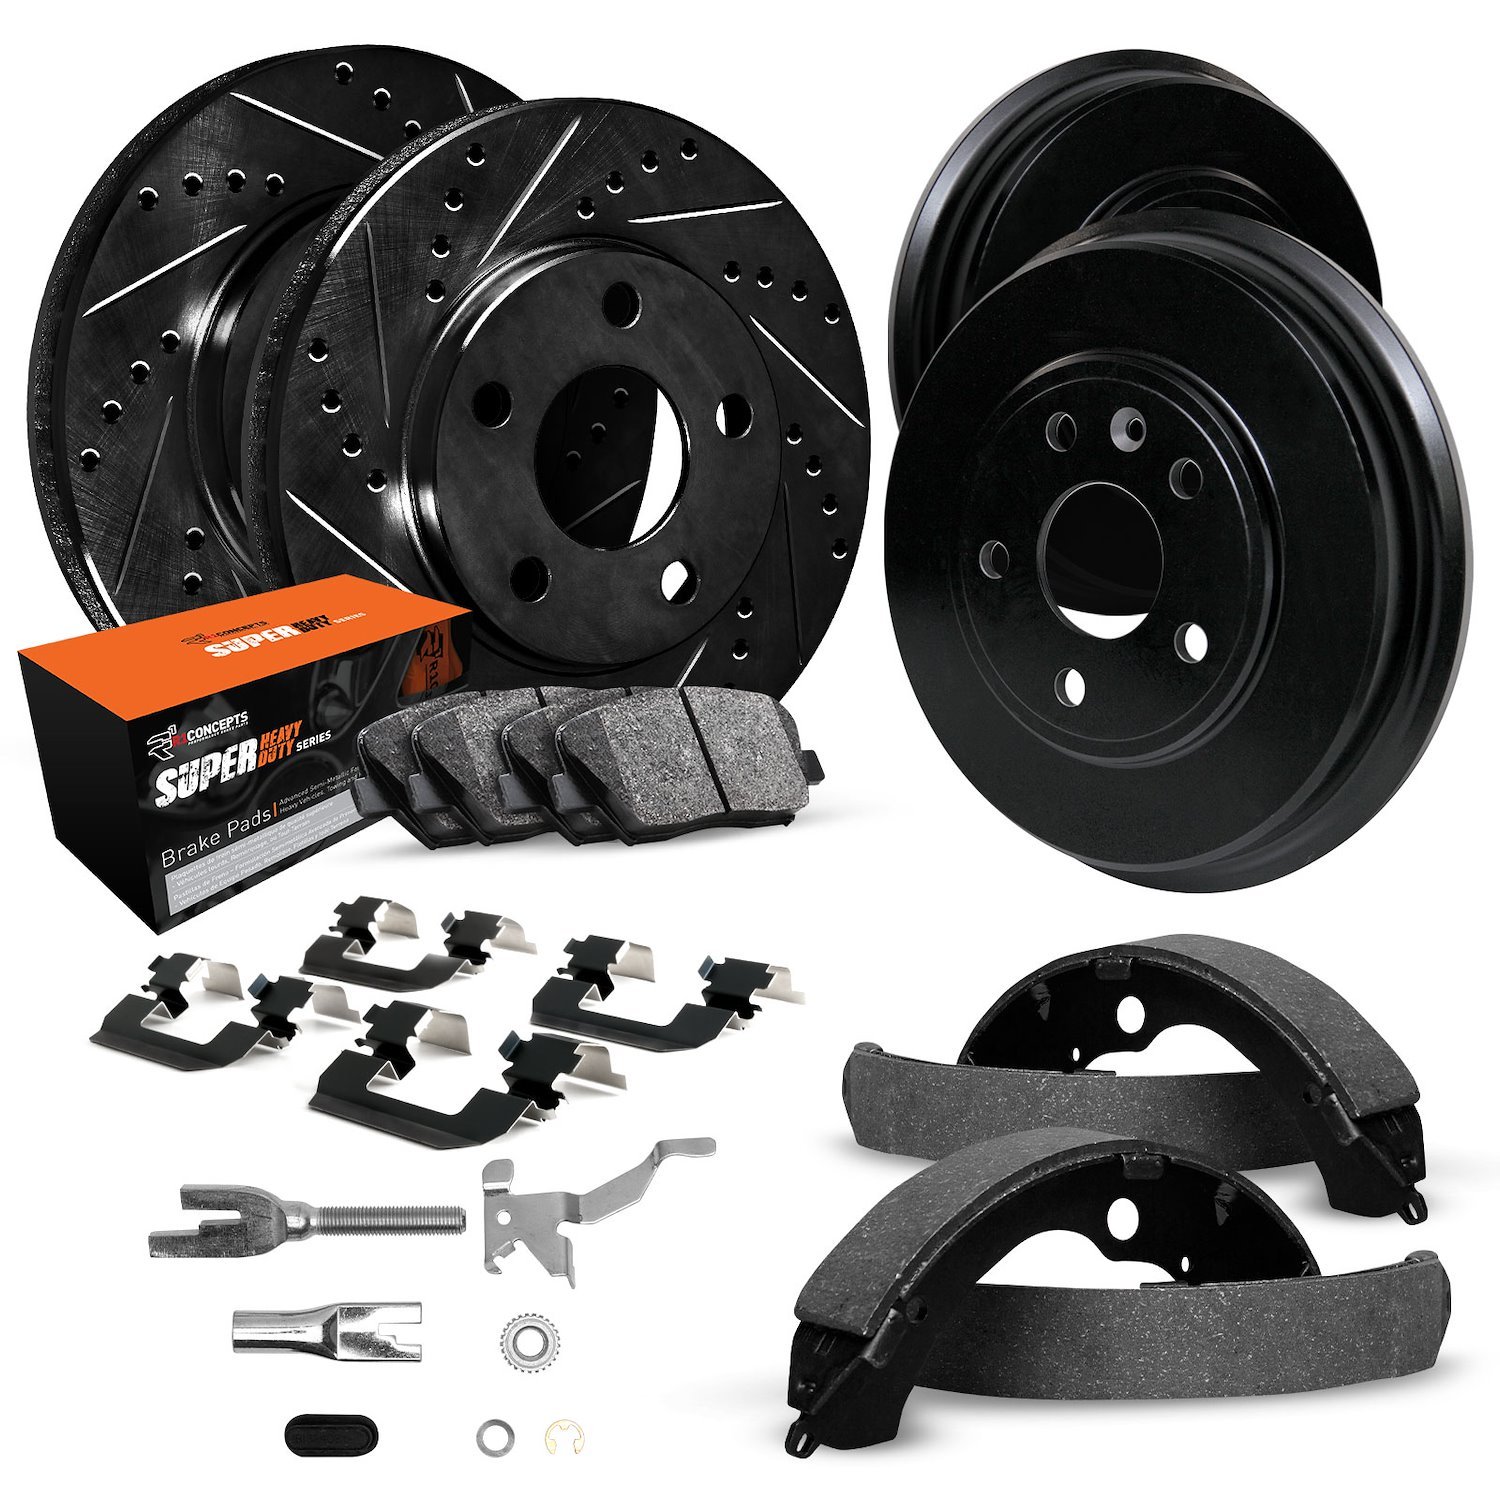 E-Line Drilled/Slotted Black Rotor & Drum Set w/Super-Duty Pads, Shoes, Hardware/Adjusters, 1990-2002 GM